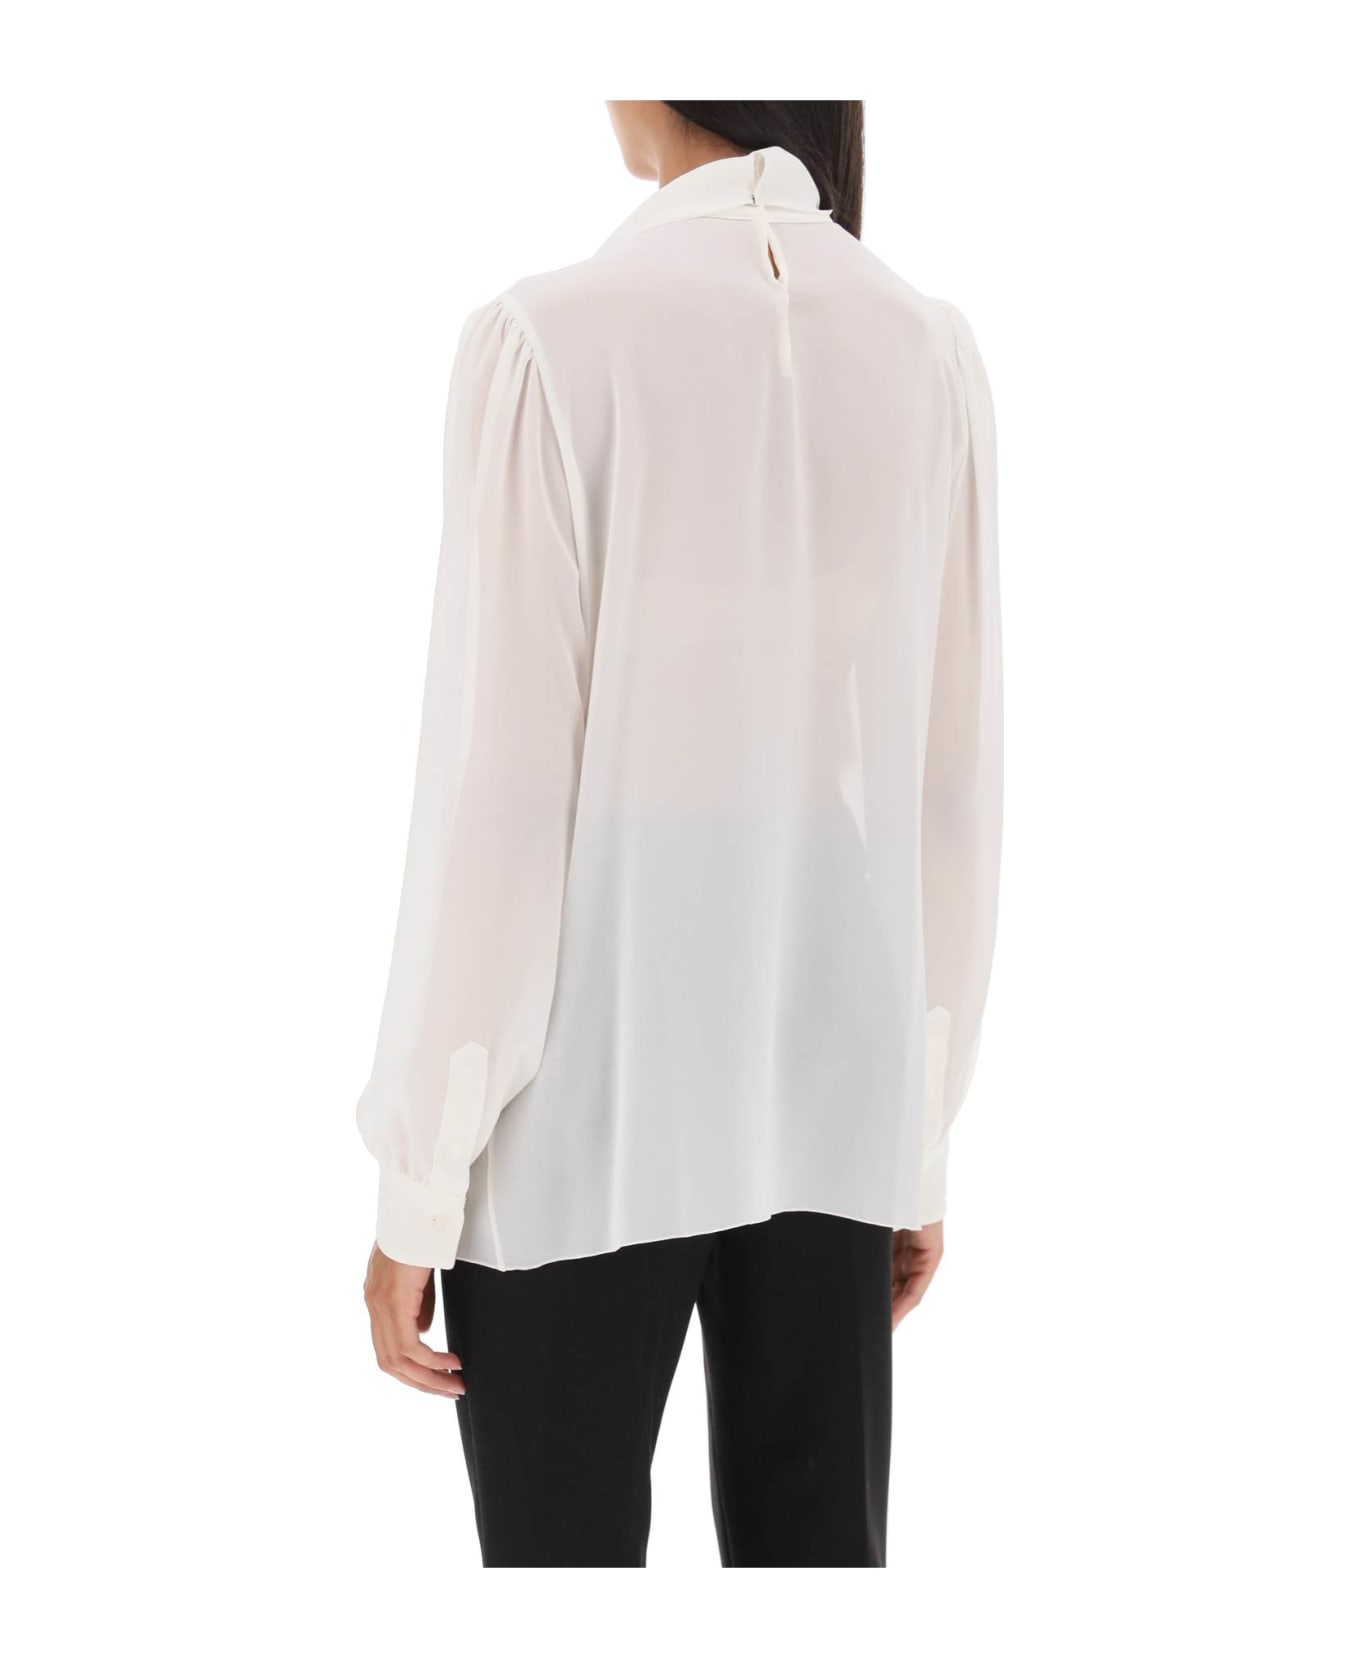 Dolce & Gabbana Silk-georgette Blouse With Ruffles - BIANCO NATURALE (White) ブラウス